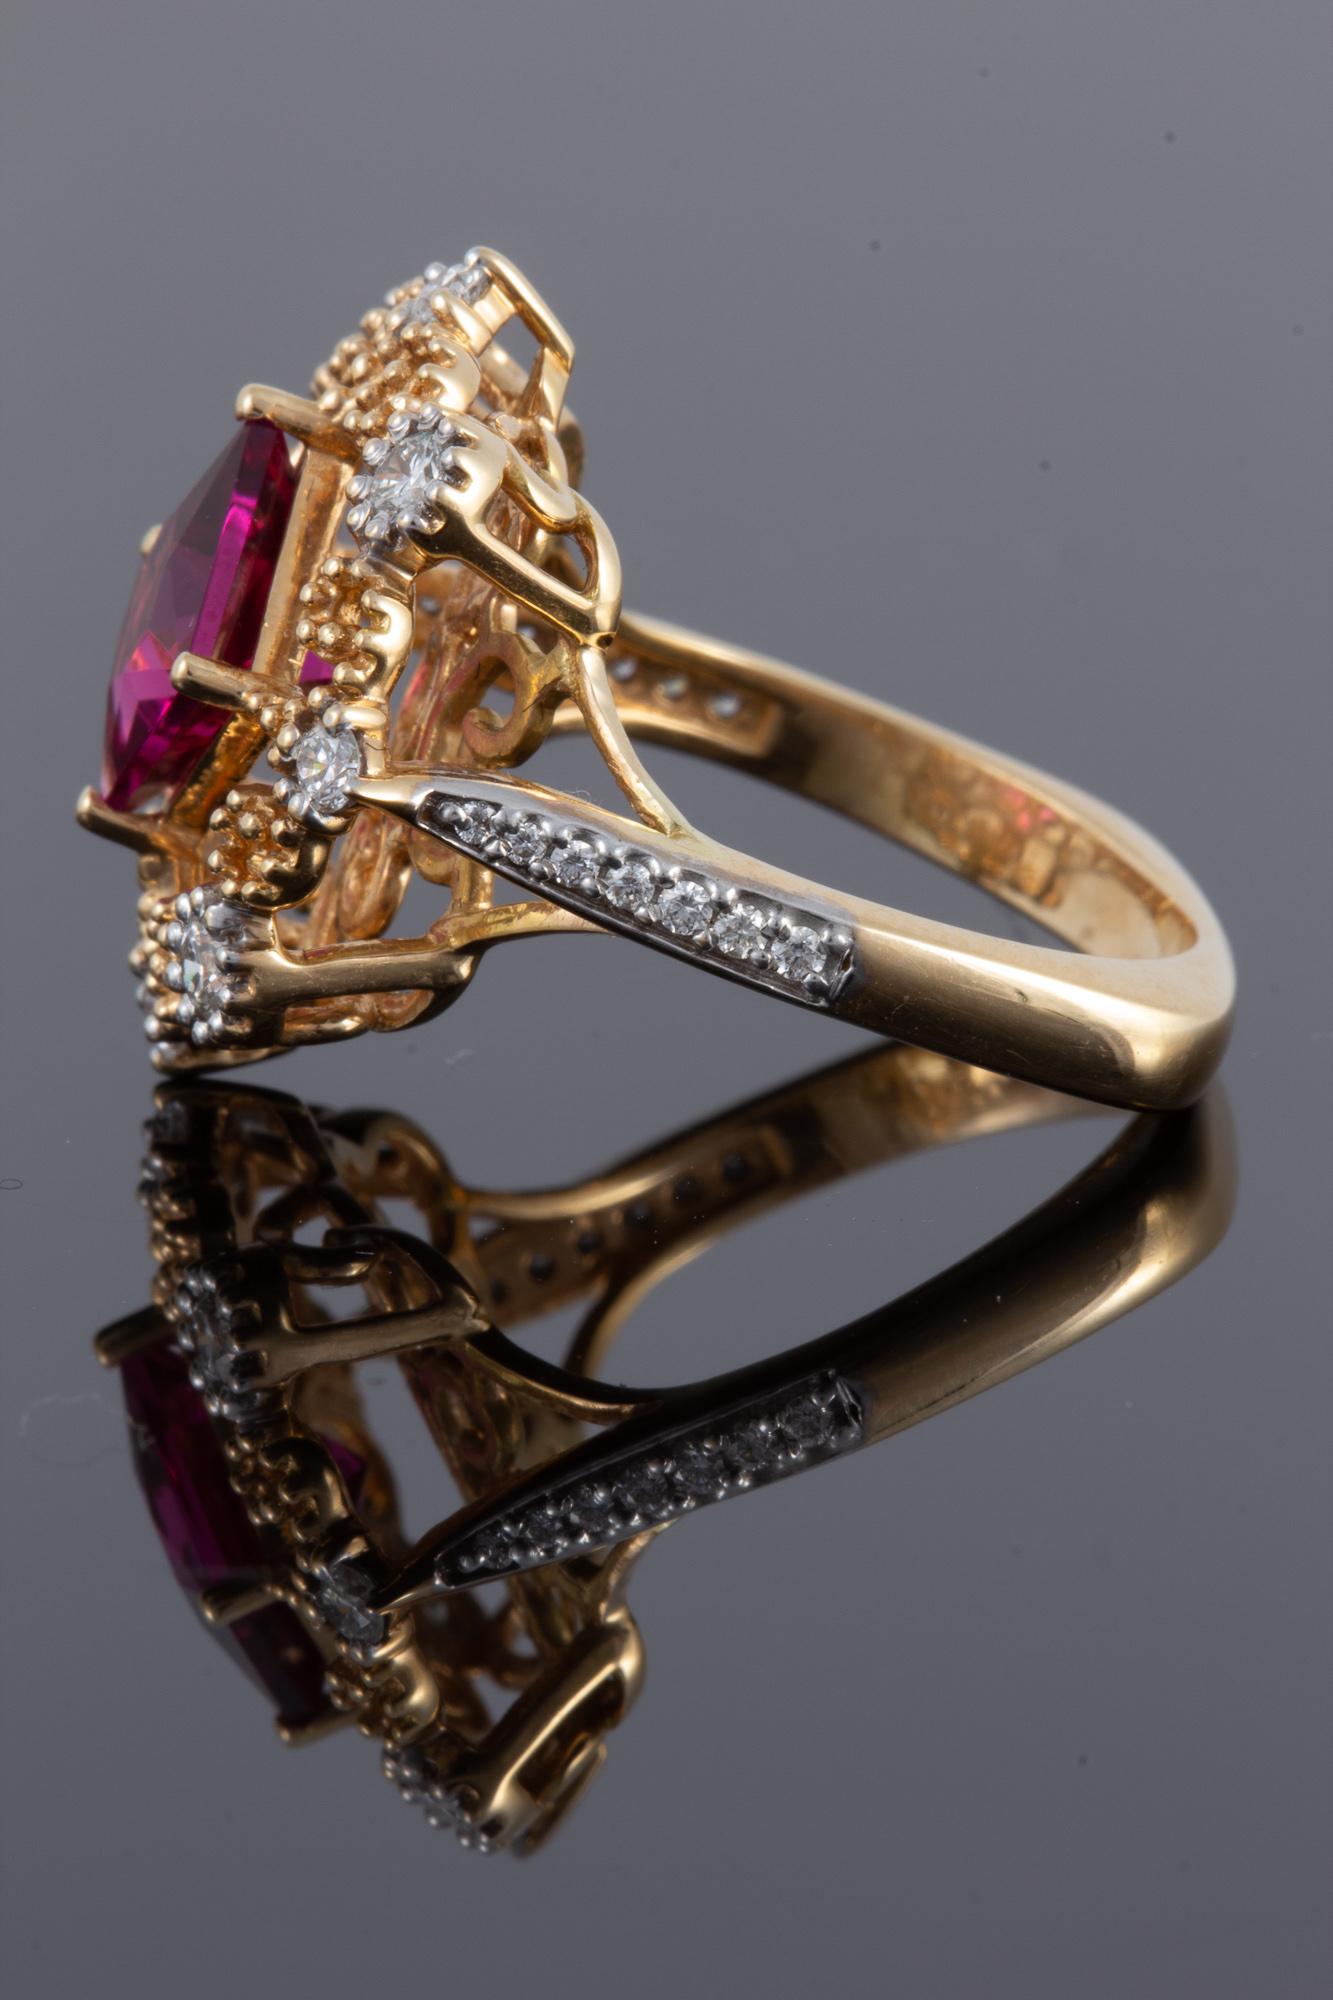 Rubellite Tourmaline and Diamond Ring set in 18 kt Gold For Sale 15